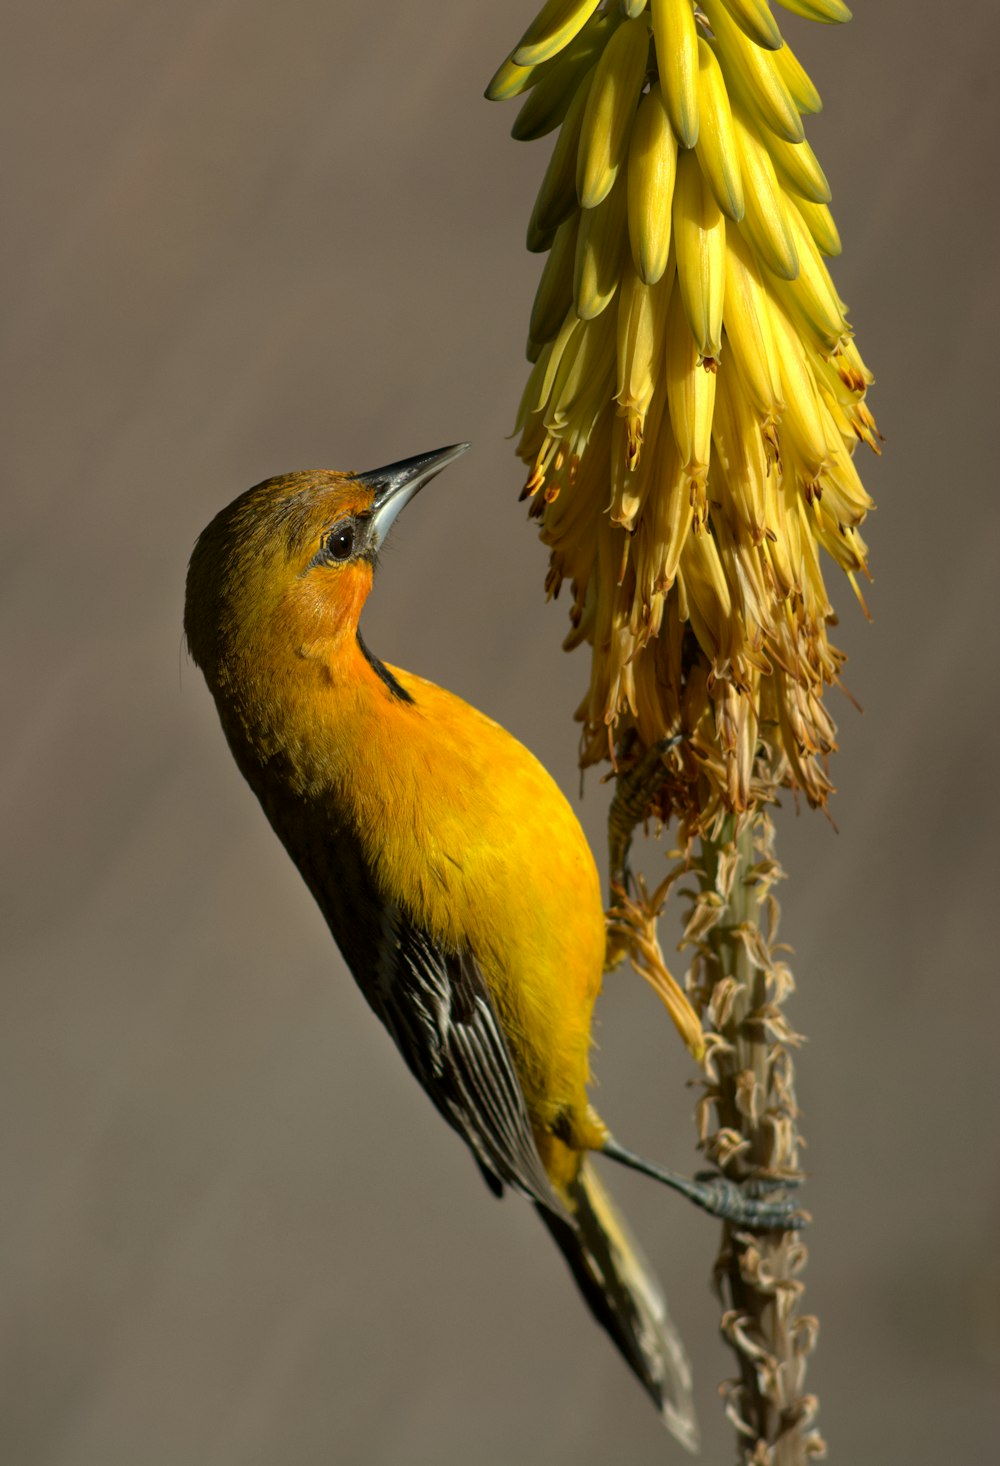 a small yellow bird perched on a flower